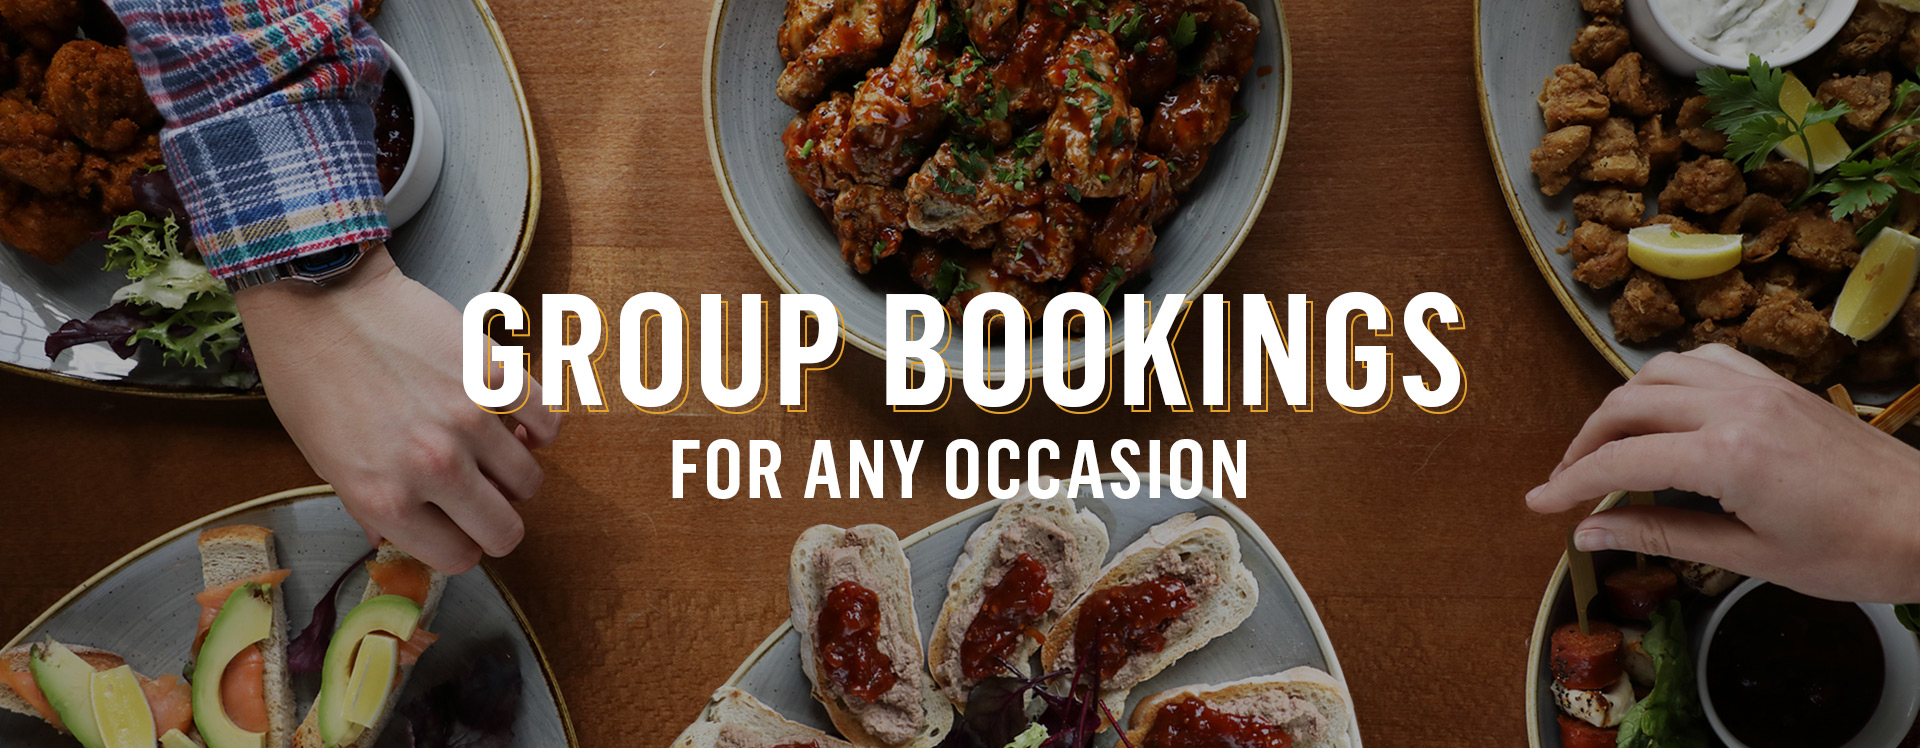 Group Bookings at The Observatory